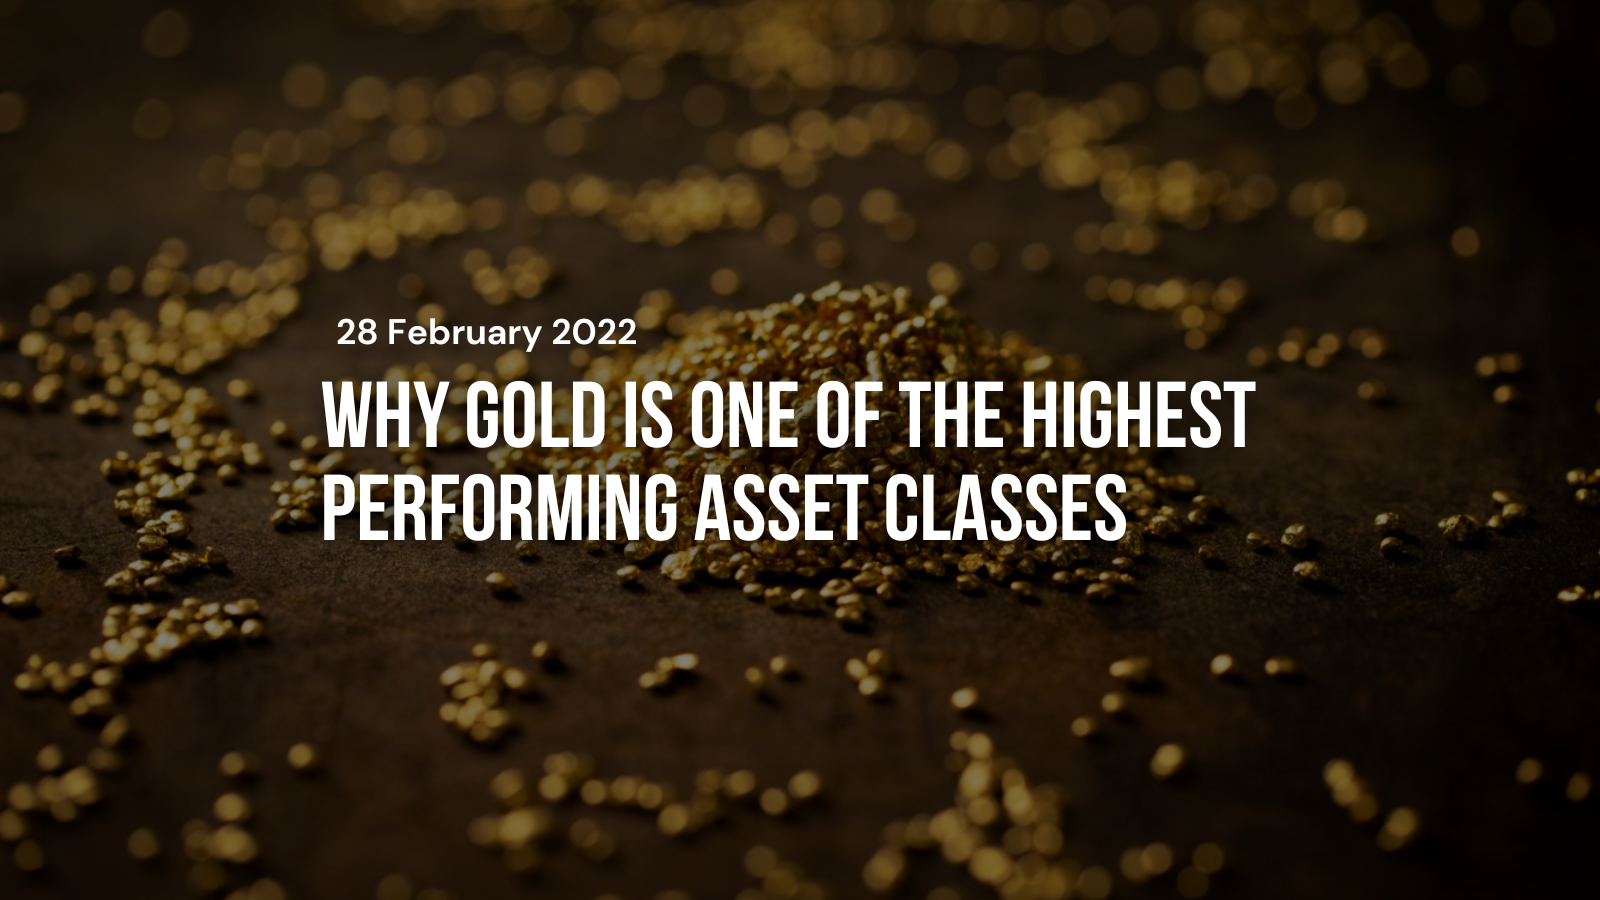 The return of inflation: Why gold is one of the highest performing asset classes investors can own